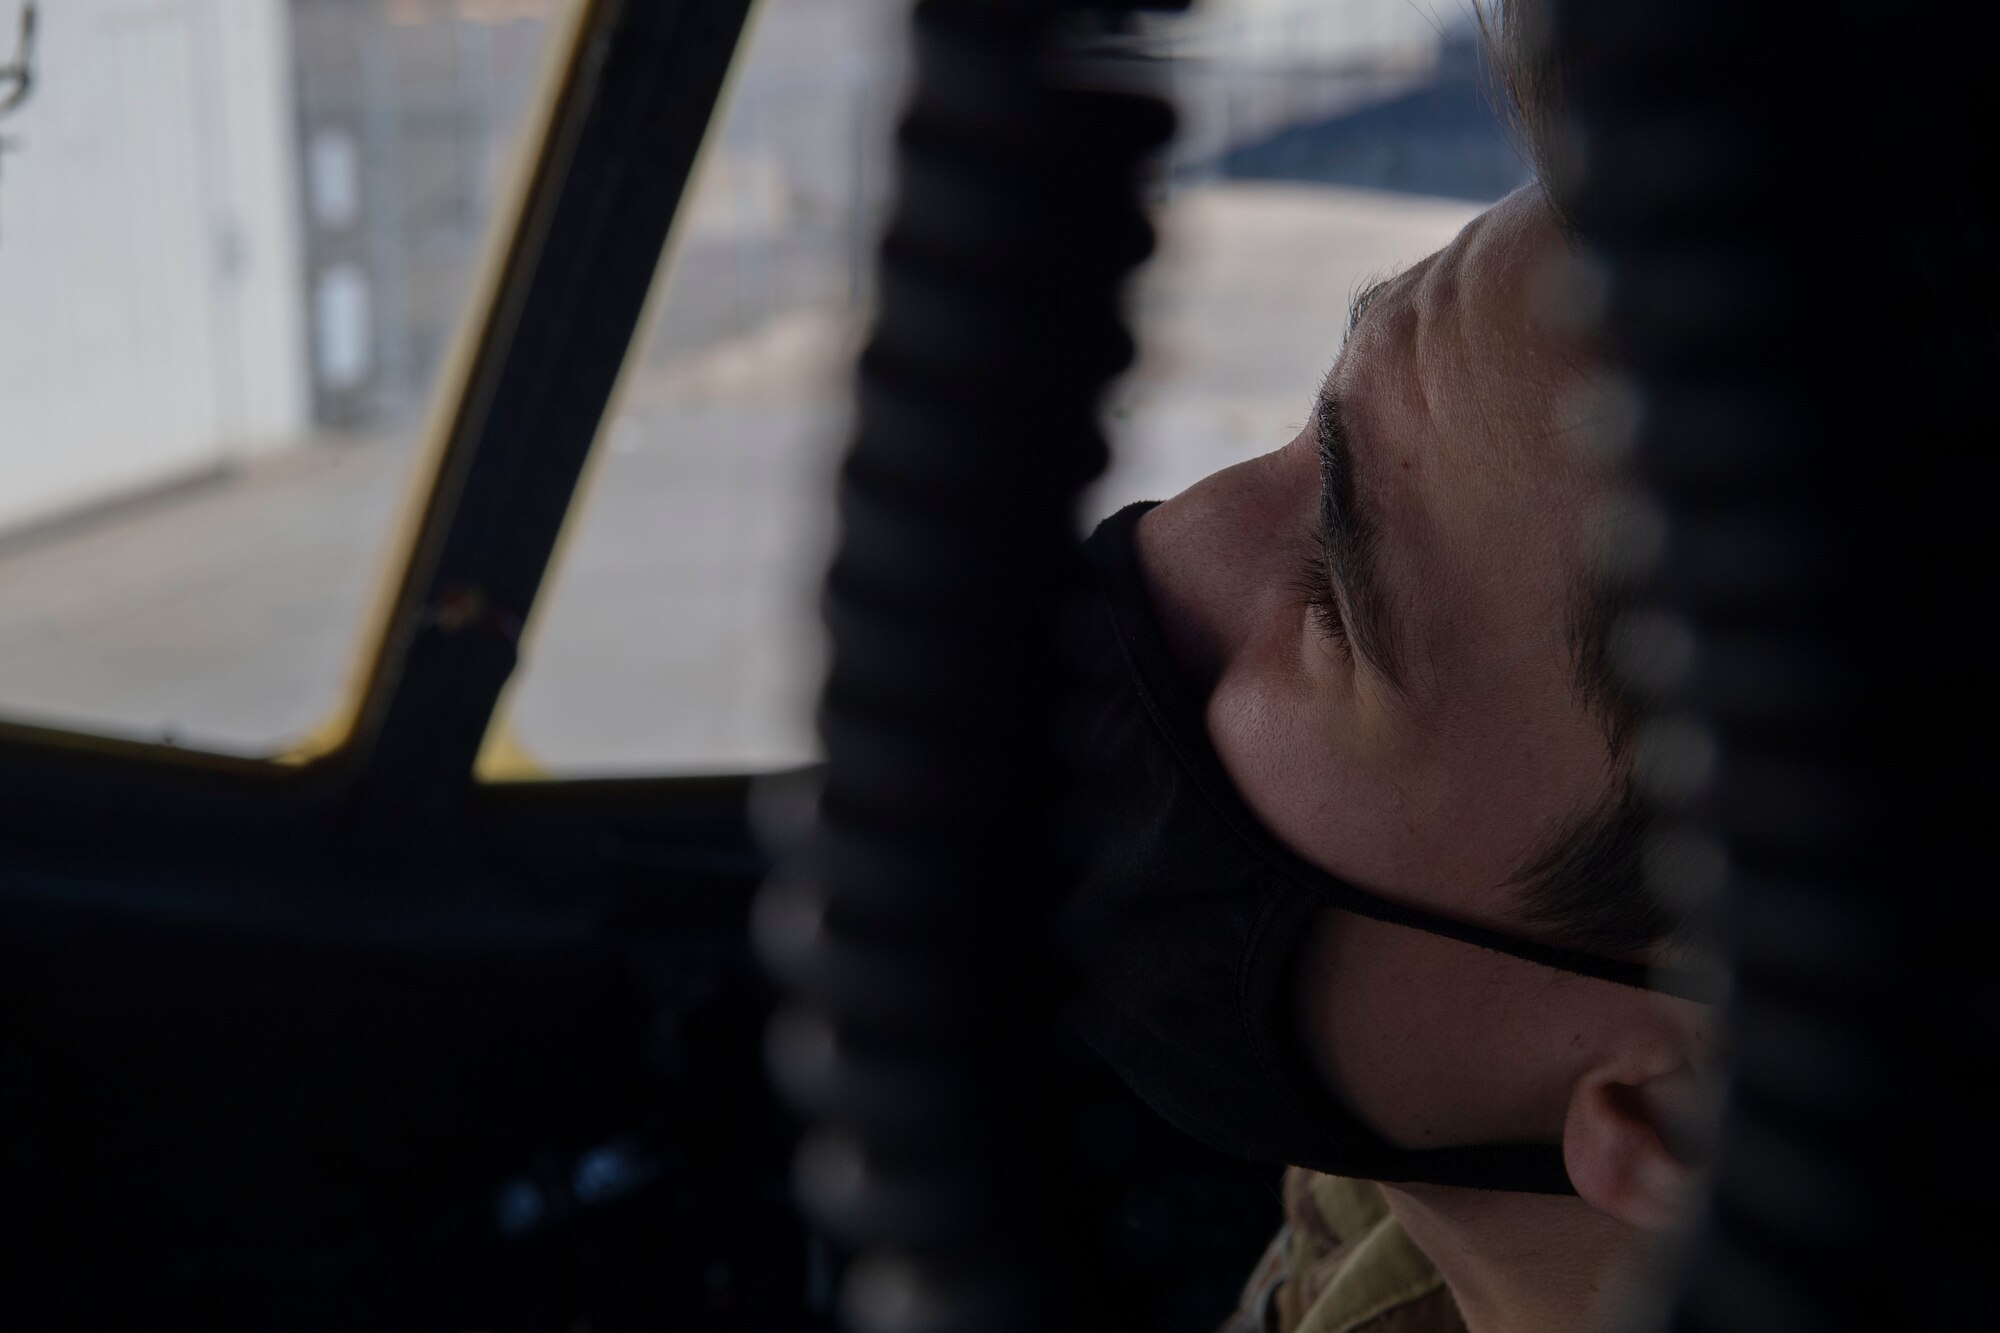 Airman 1st Class Cameron Bou, 41st Airlift Squadron loadmaster, prepares a C-130J Super Hercules for flight during pre-deployment training at Montrose Regional Airport, Colorado, July 27, 2020. This training is part of the 4/12 deployment initiative, which was developed in 2019 between airlift squadrons from Dyess Air Force Base, Texas and Little Rock AFB, allowing each squadron a full year of dwell time followed by a four-month rotation to their respective area of responsibility. (U.S. Air Force photo by Airman 1st Class Aaron Irvin)